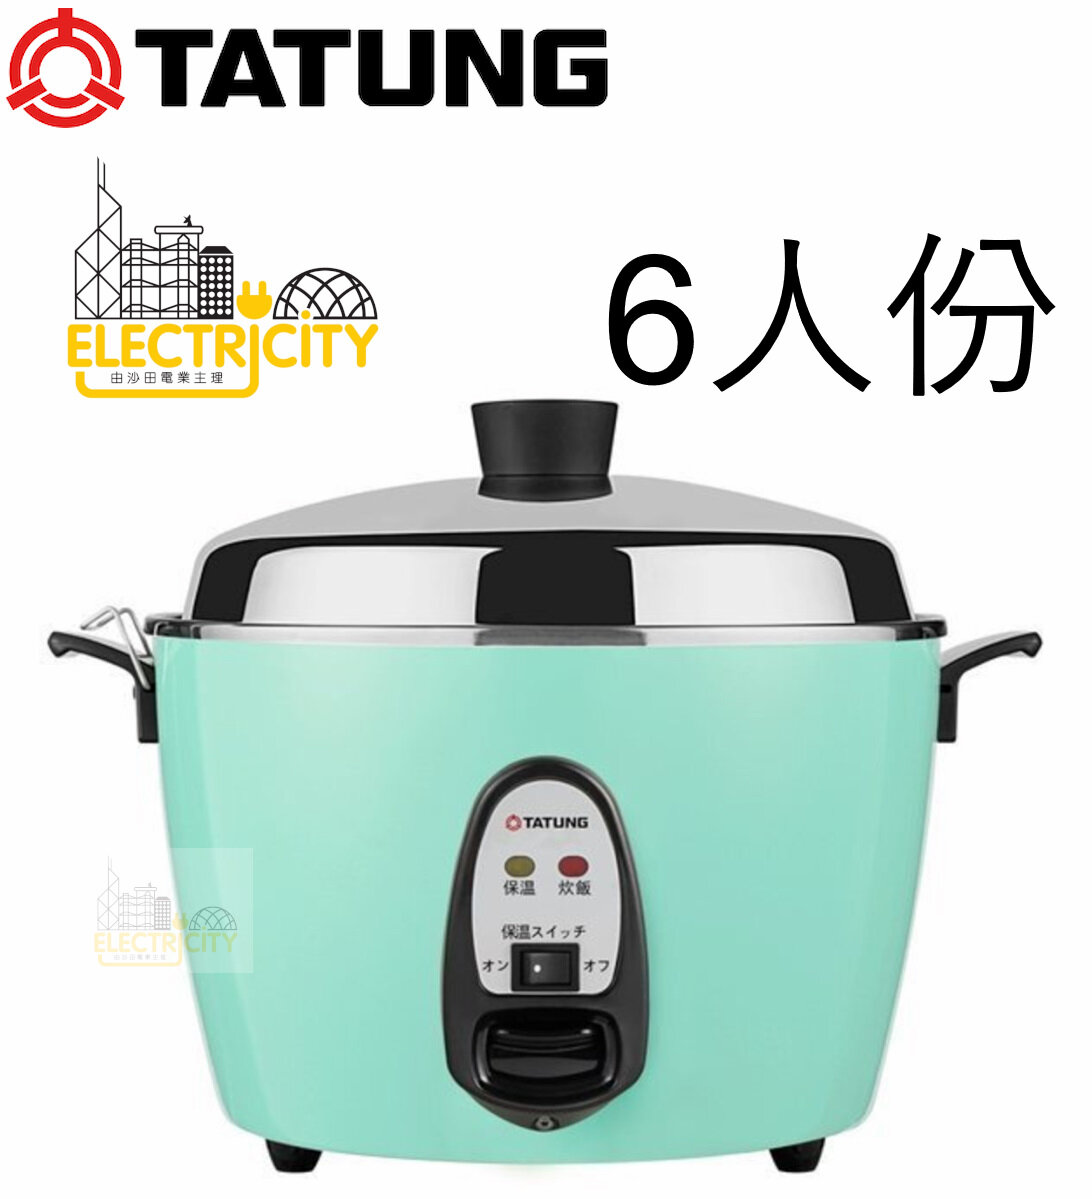 Tatung Electric Rice Cooker and Steamer (11-Cup Stainless Steel), Red